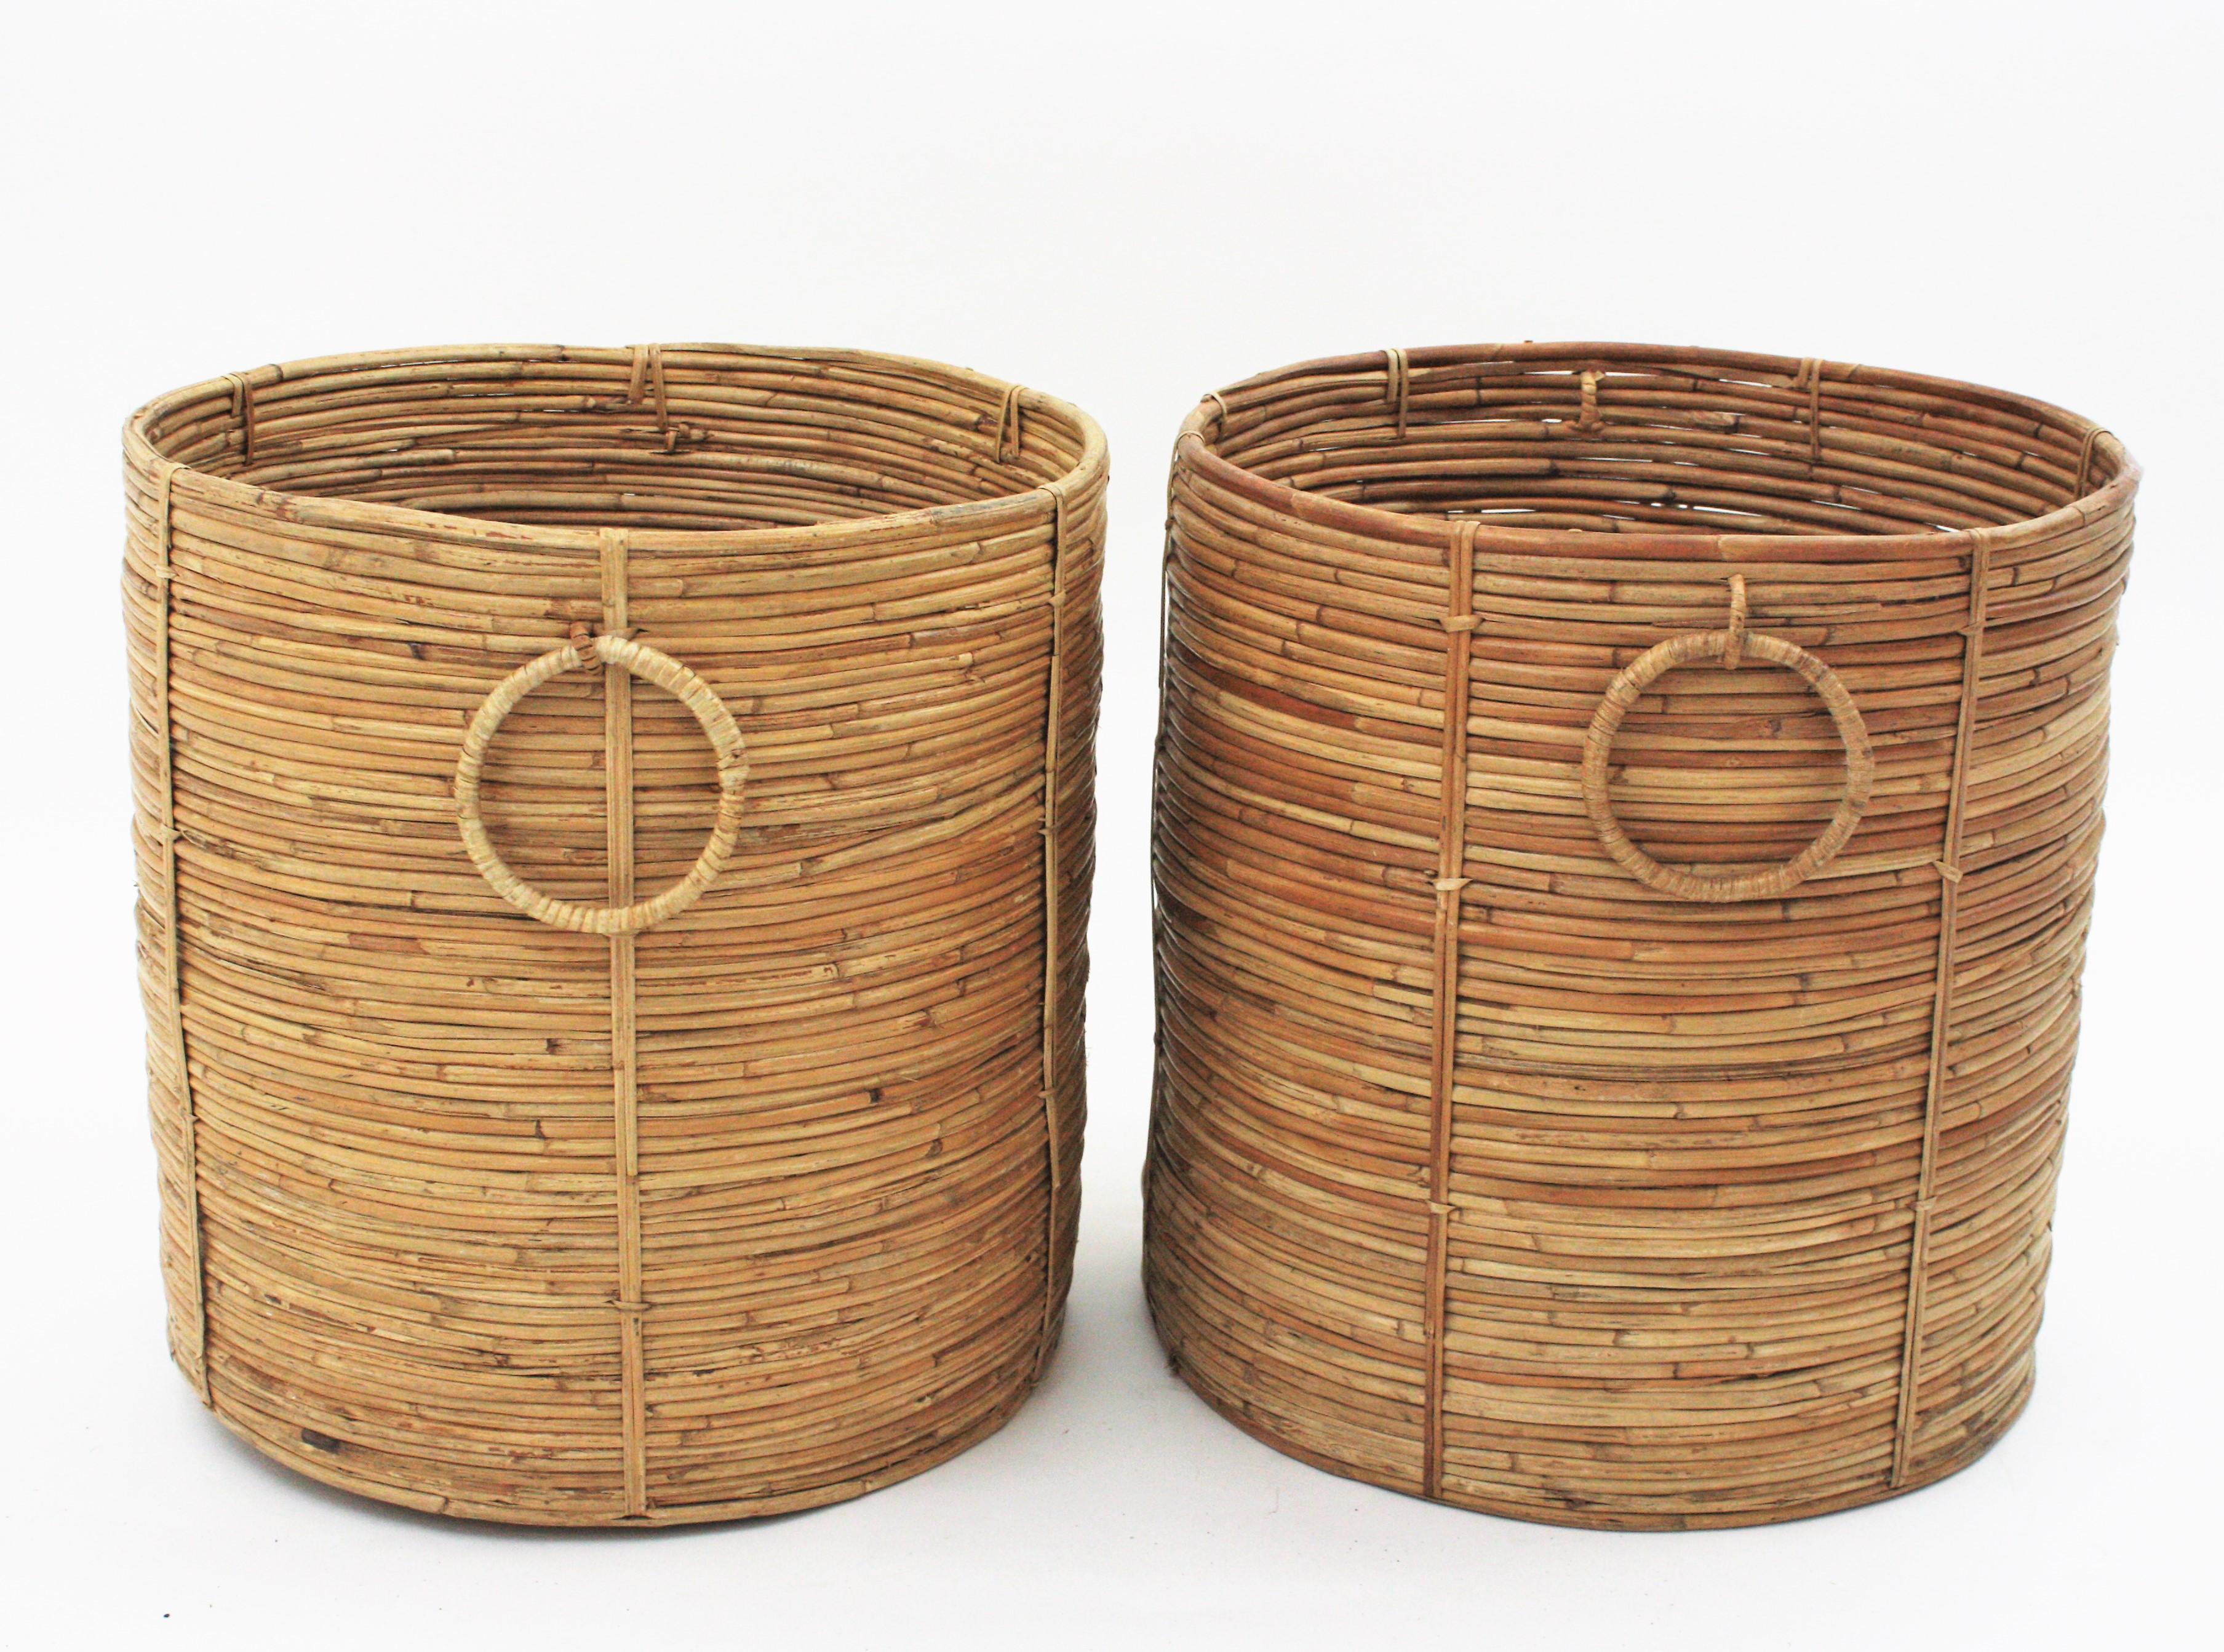 Beautiful Pair of Mid-Century Modern rattan pencil reed large planters or baskets. Handcrafted in Italy, 1970s.
Round shape with ring handles at both sides. Inspired on Gabriella Crespi designs.
Beautiful placed together as a set or at separately